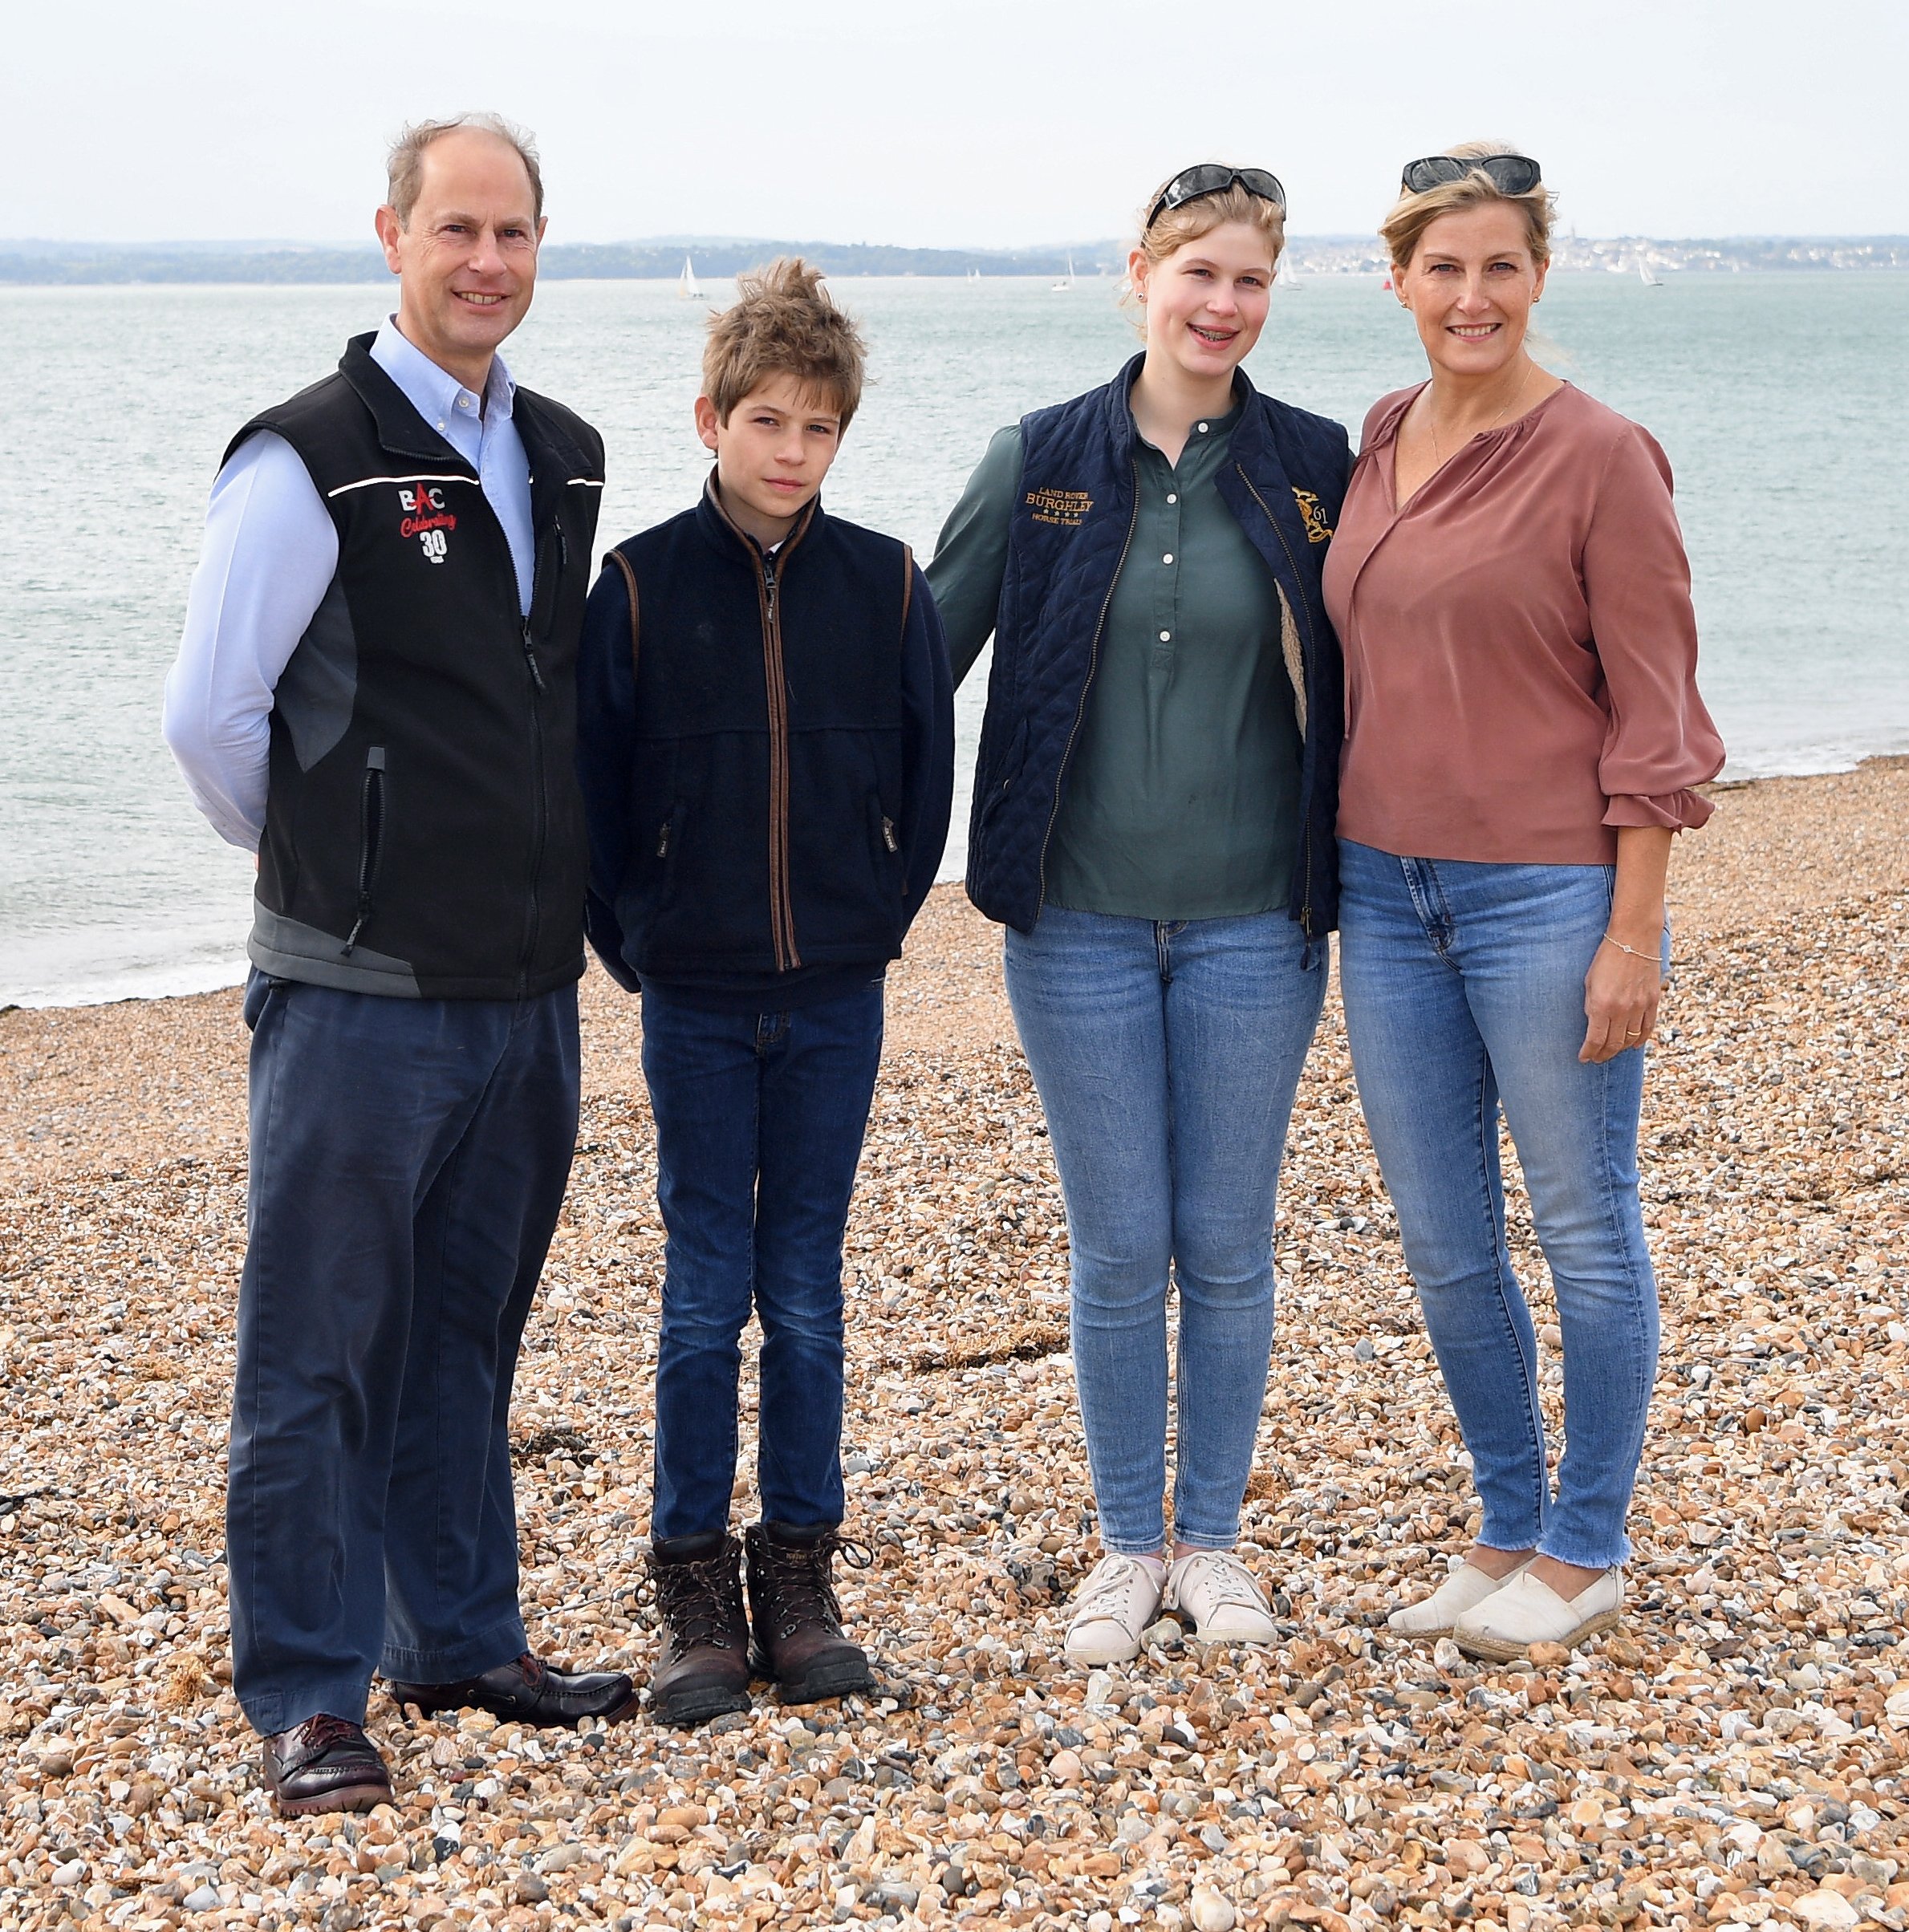 Prince Edward, Earl of Wessex, James, Viscount Severn, Lady Louise Windsor, and Sophie, Countess of Wessex at the Southsea beach on September 20, 2020 | Source: Getty Images